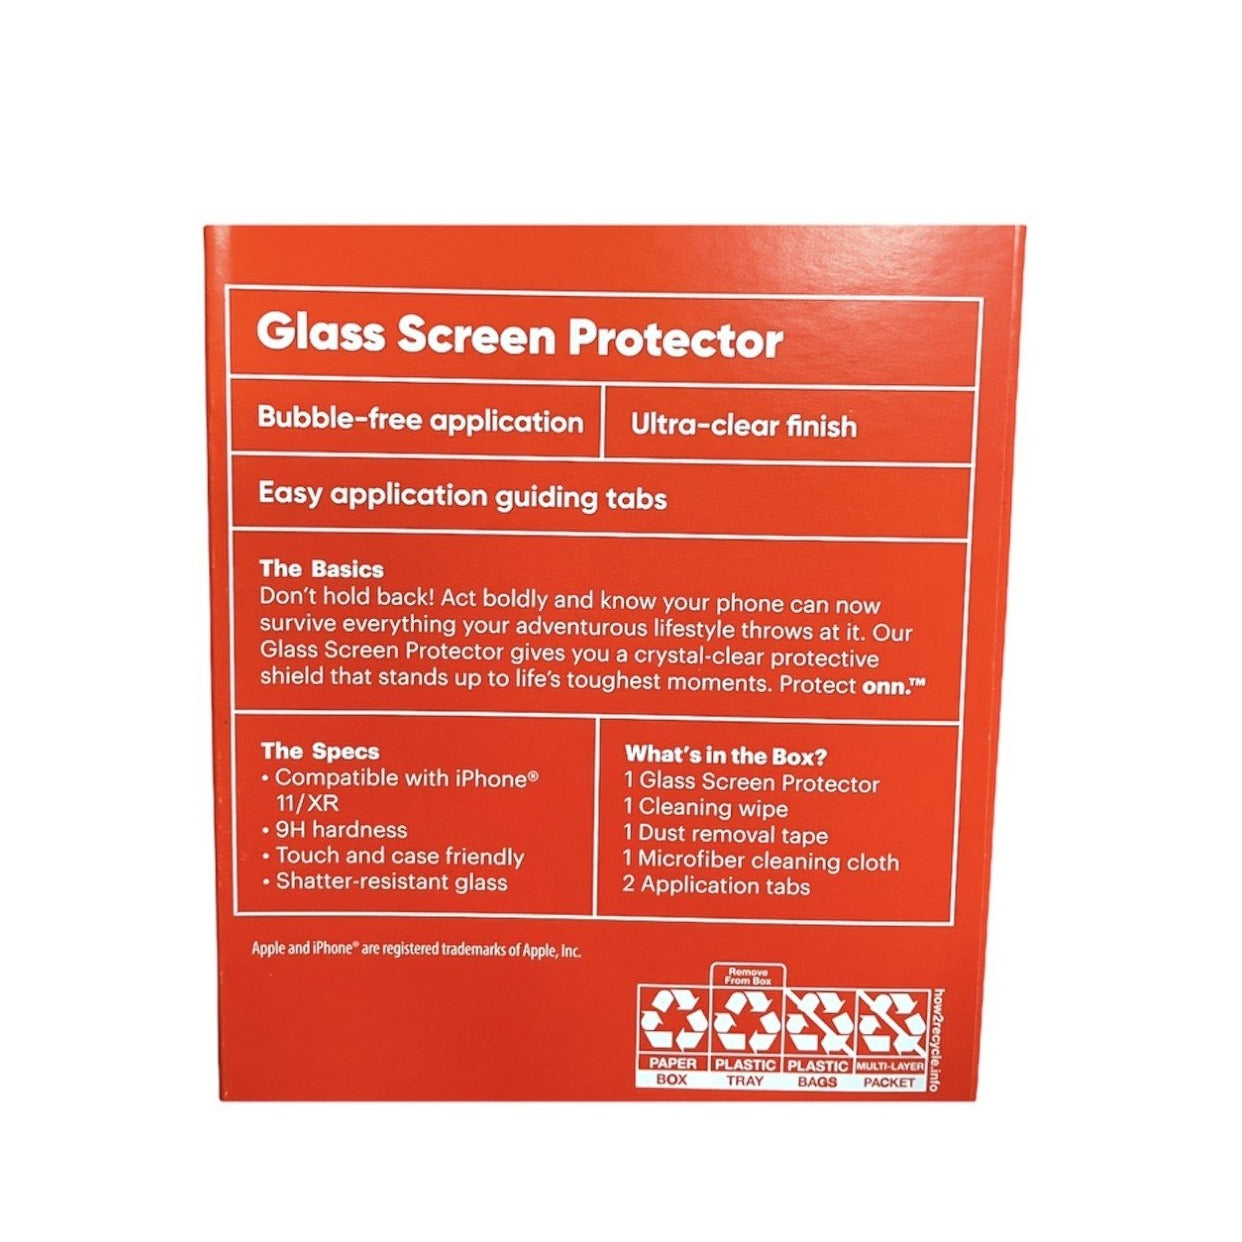 Onn Glass Screen Protector For iPhone 11, iPhone XR - Pack Of 10